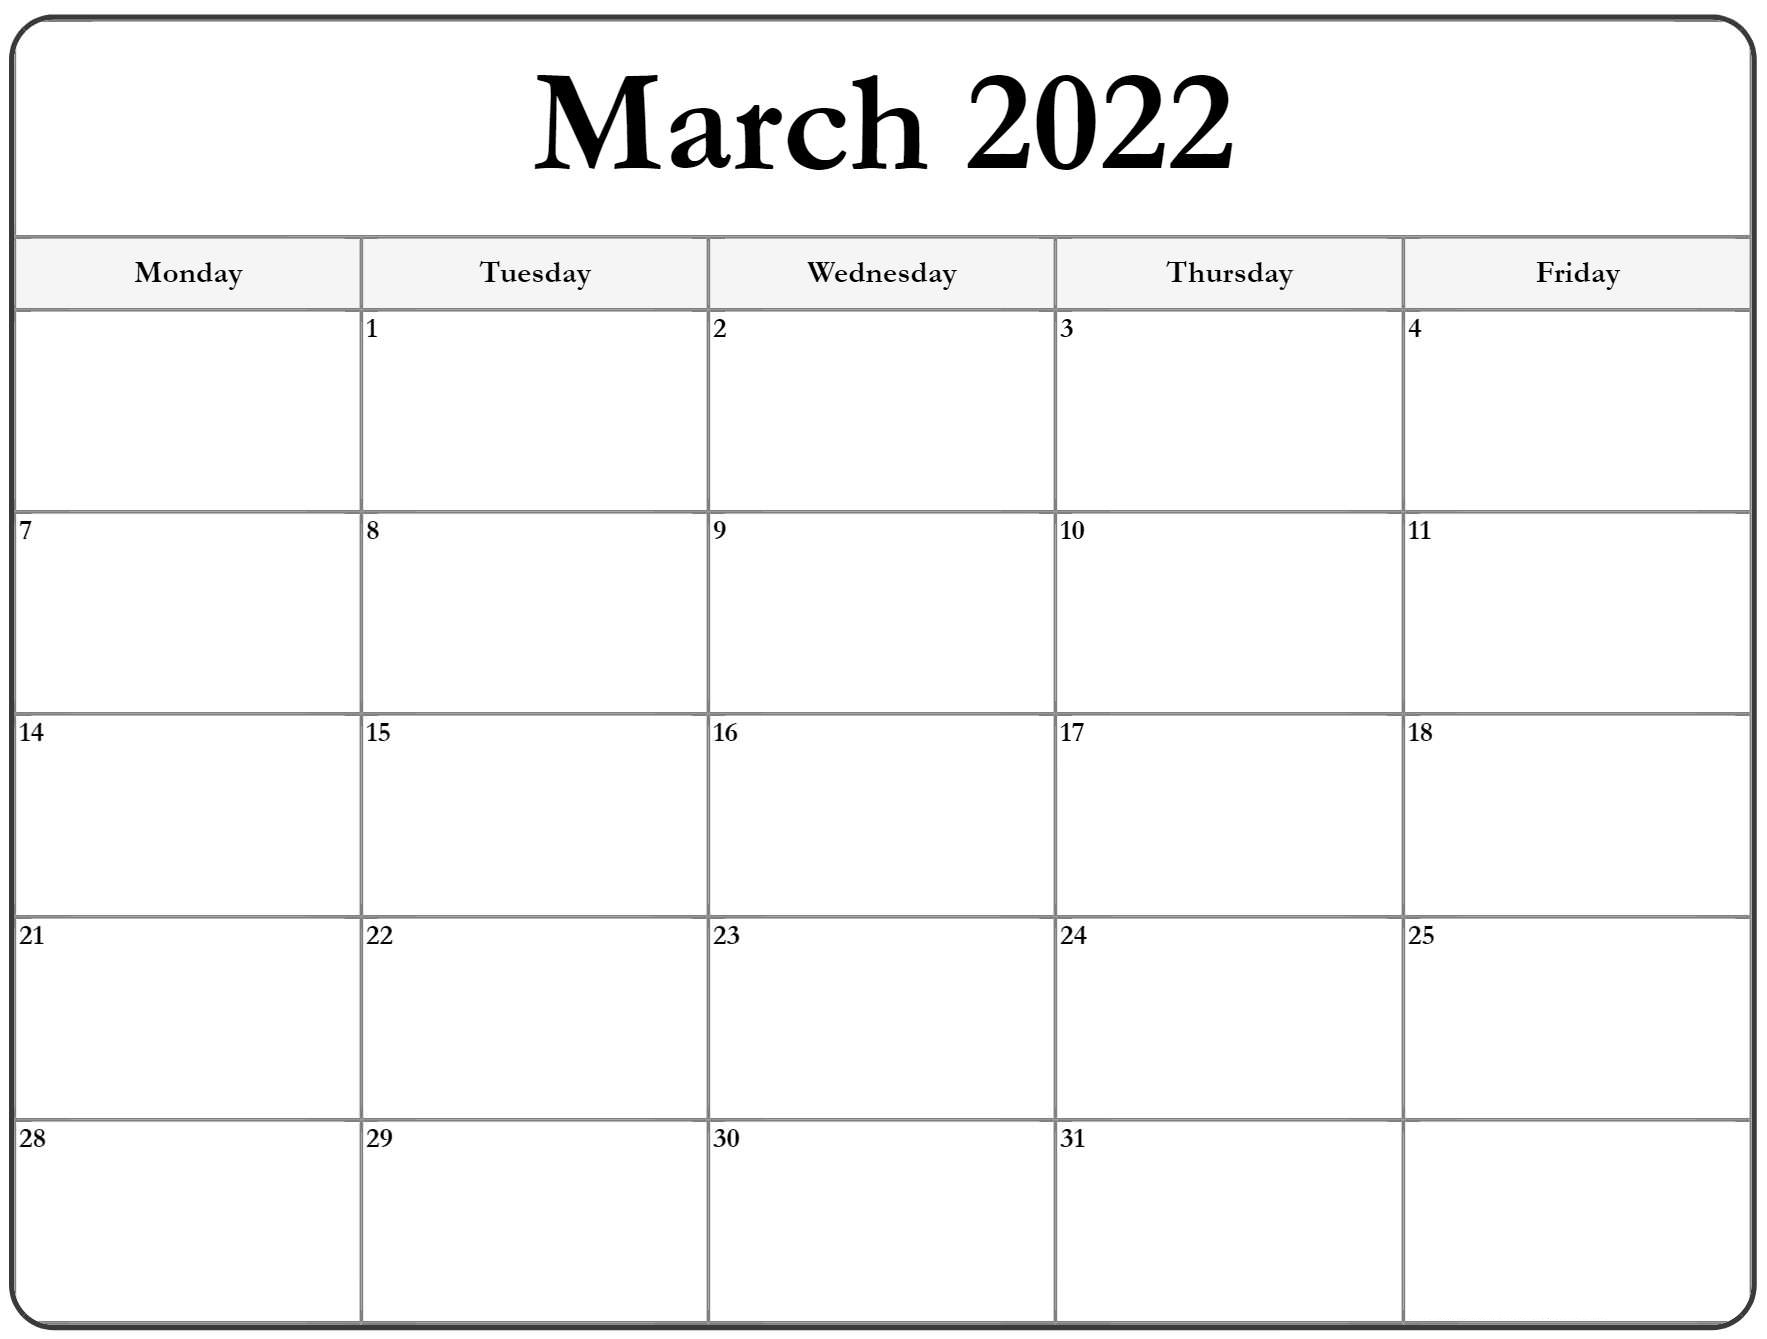 March 2022 Weekly Calendar Template